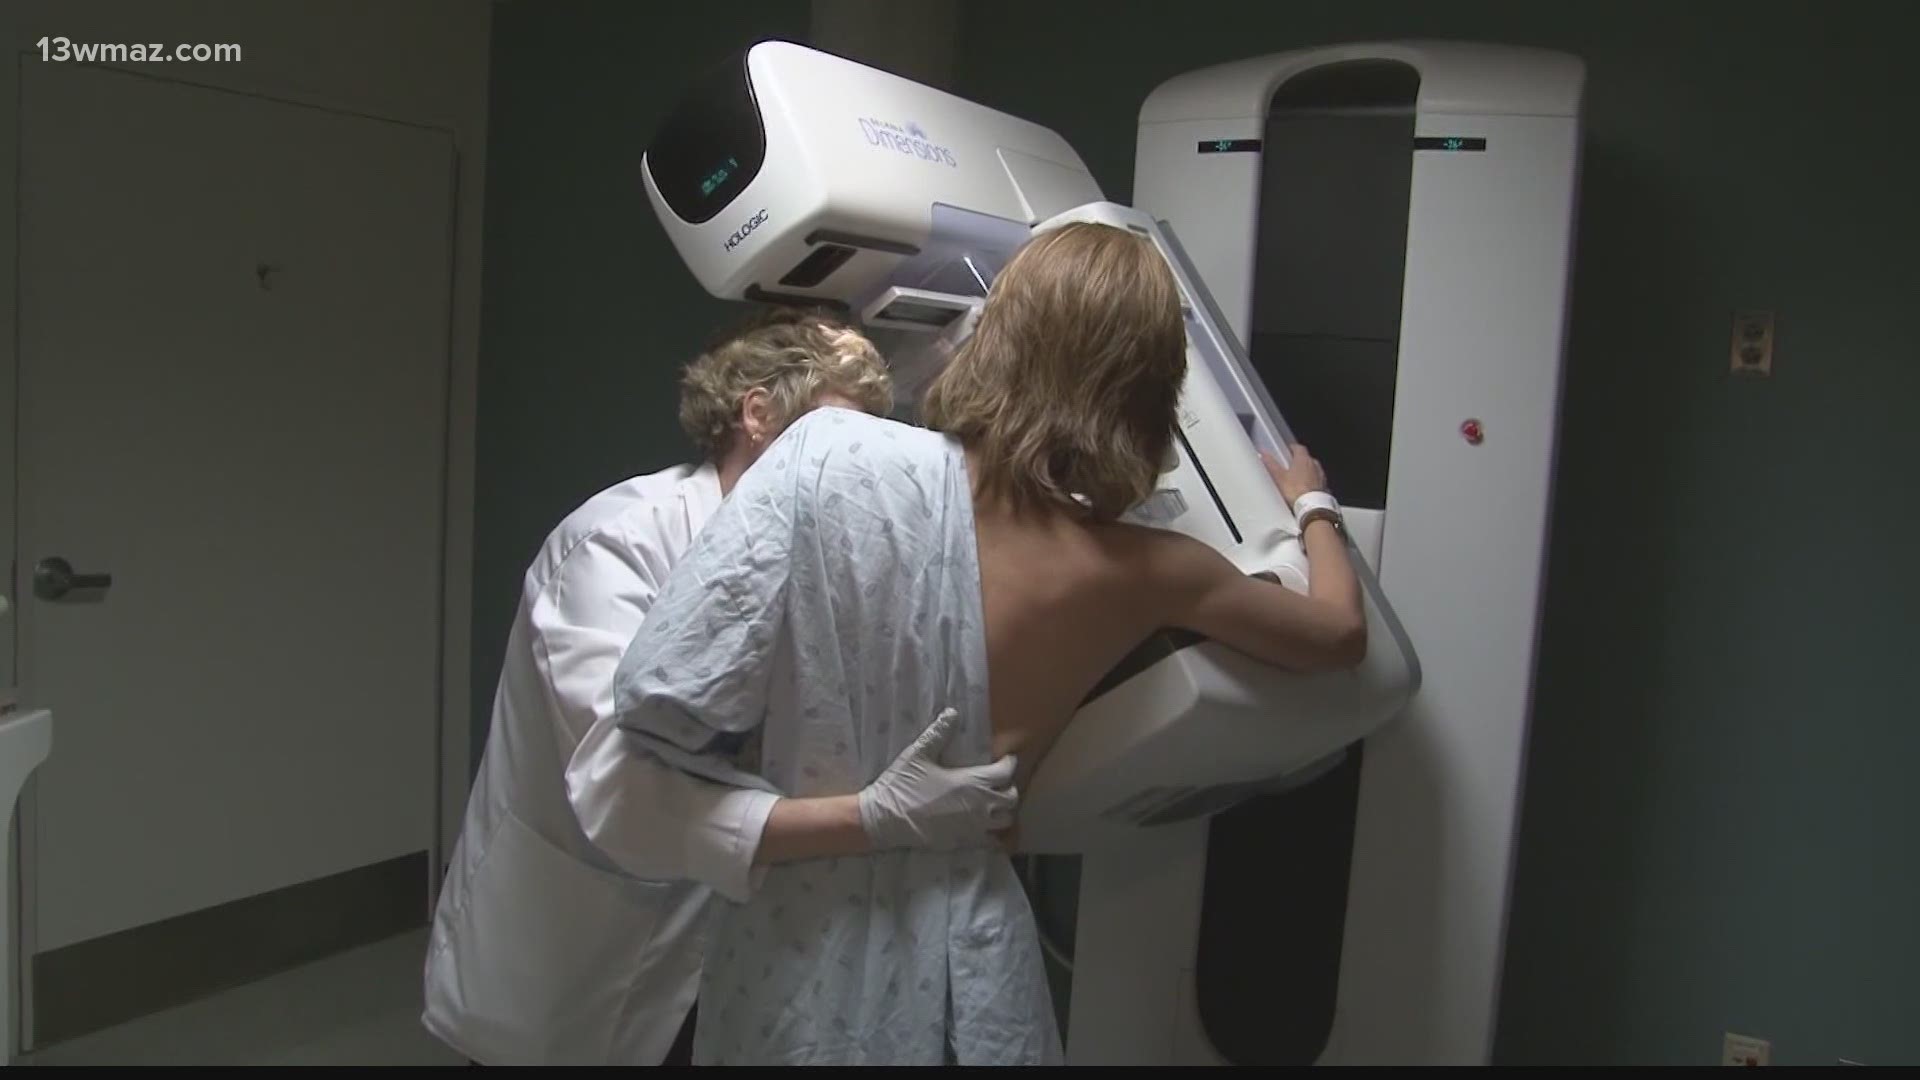 Groundbreaking technology is helping detect breast cancer sooner and that can save lives.